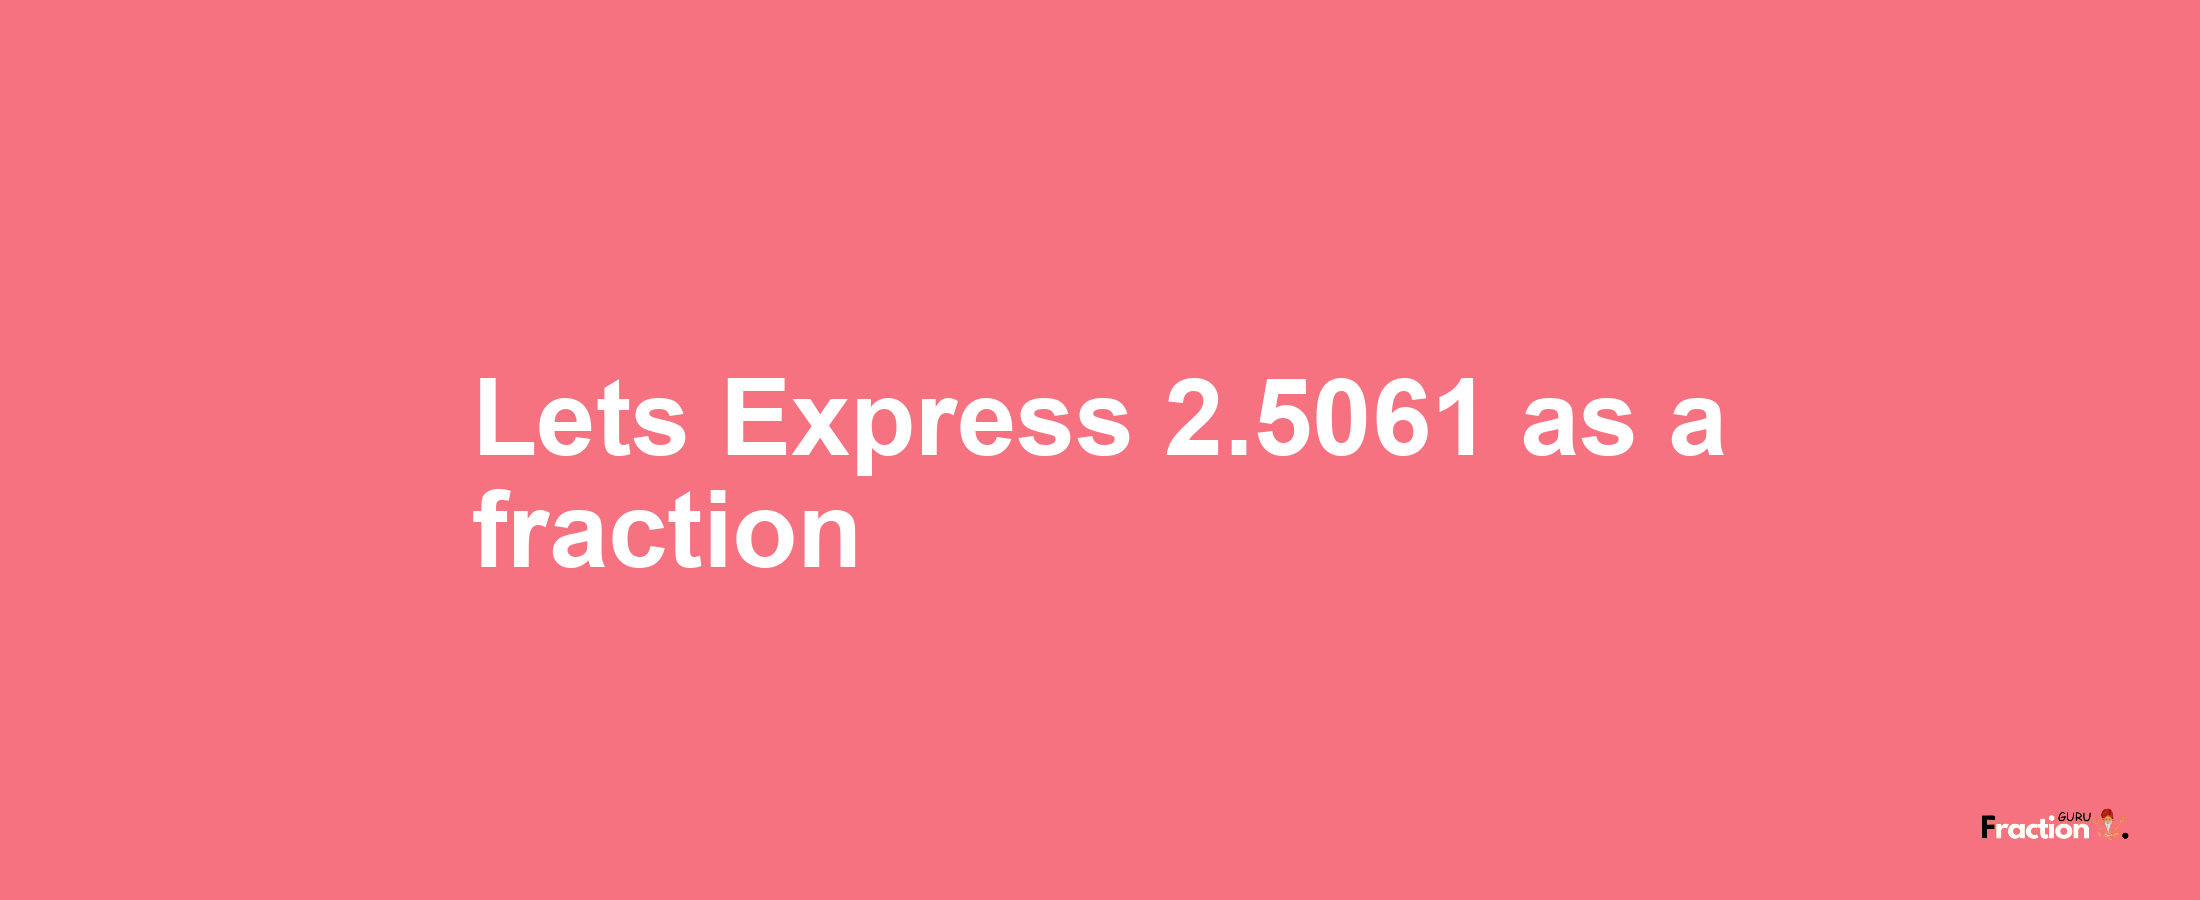 Lets Express 2.5061 as afraction